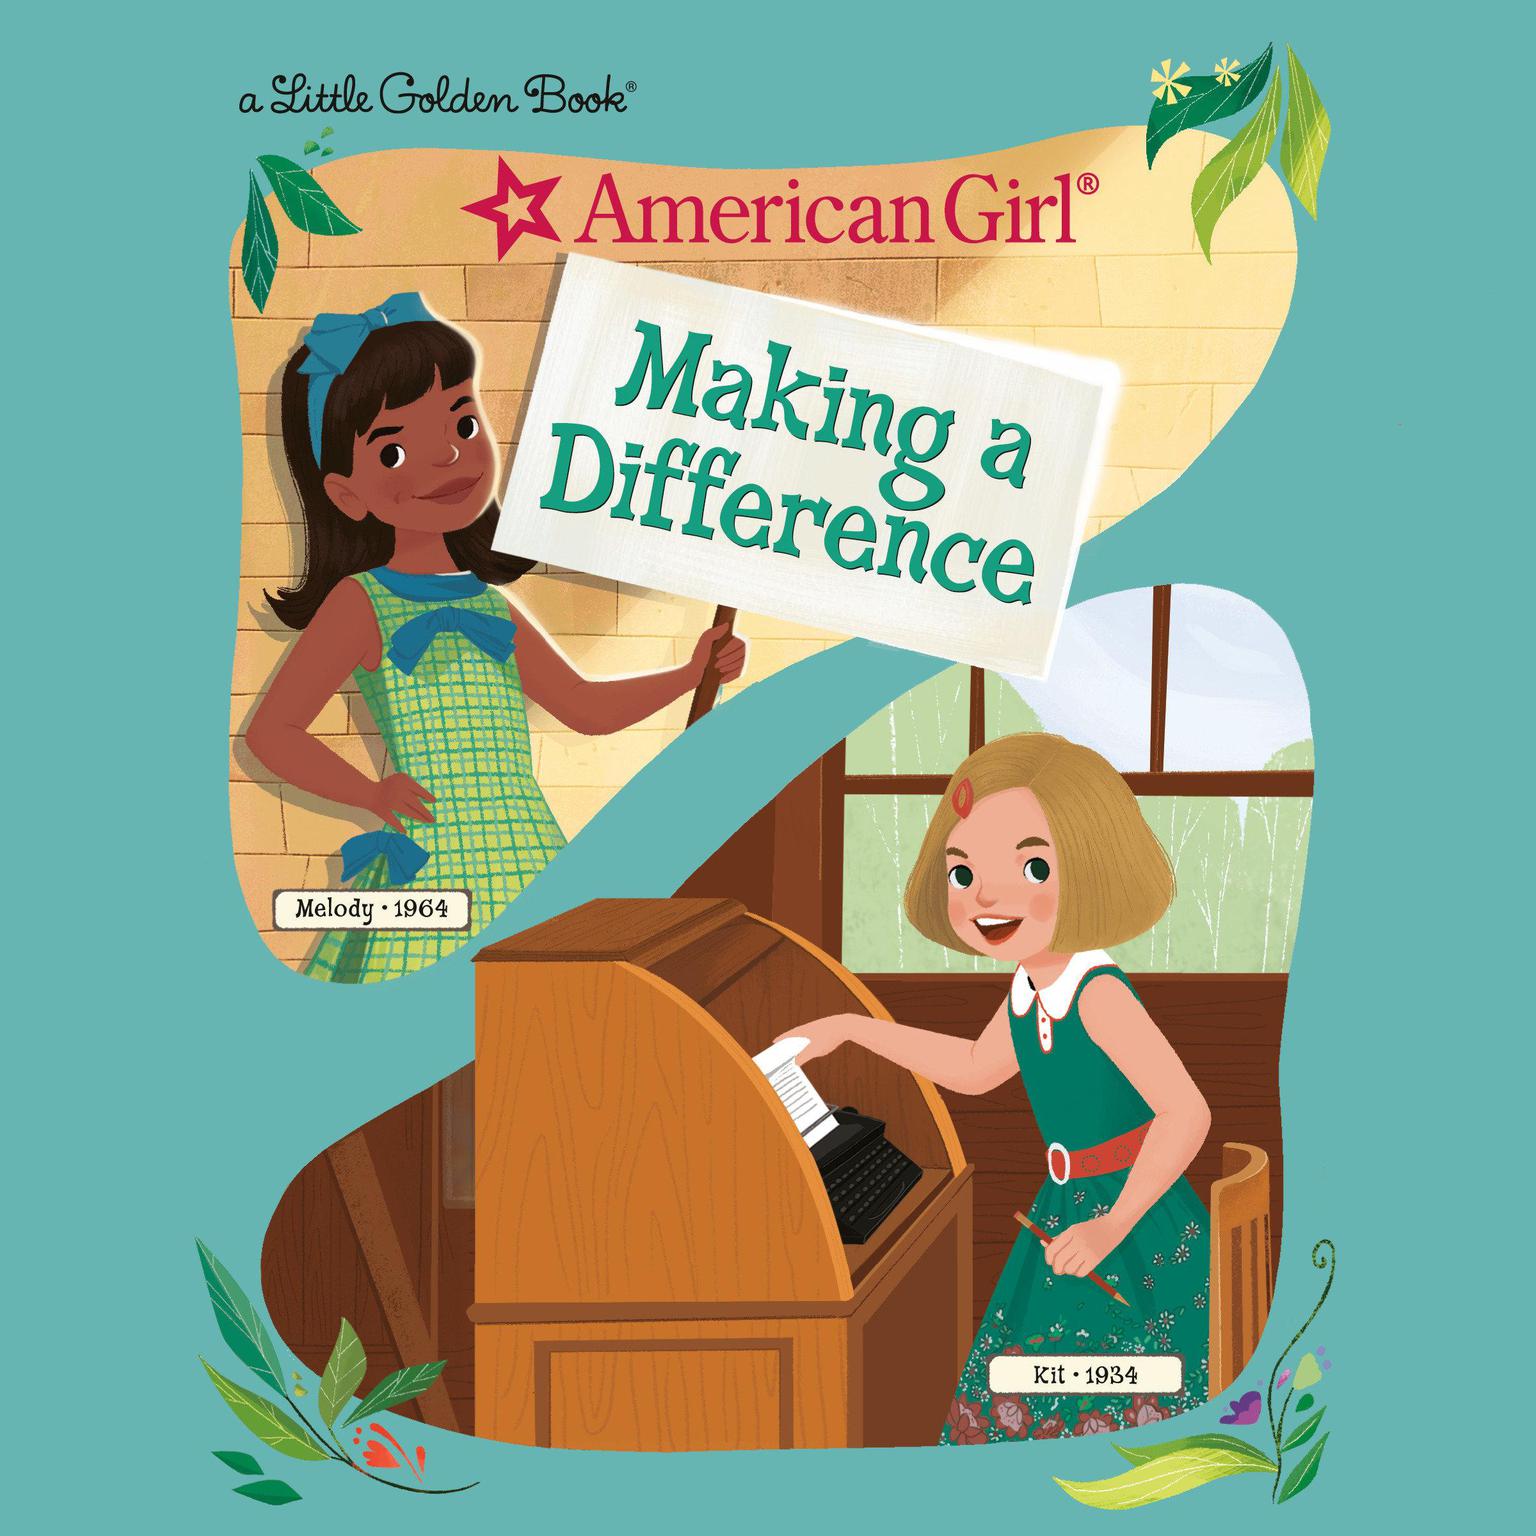 Making a Difference (American Girl) Audiobook, by Rebecca Mallary